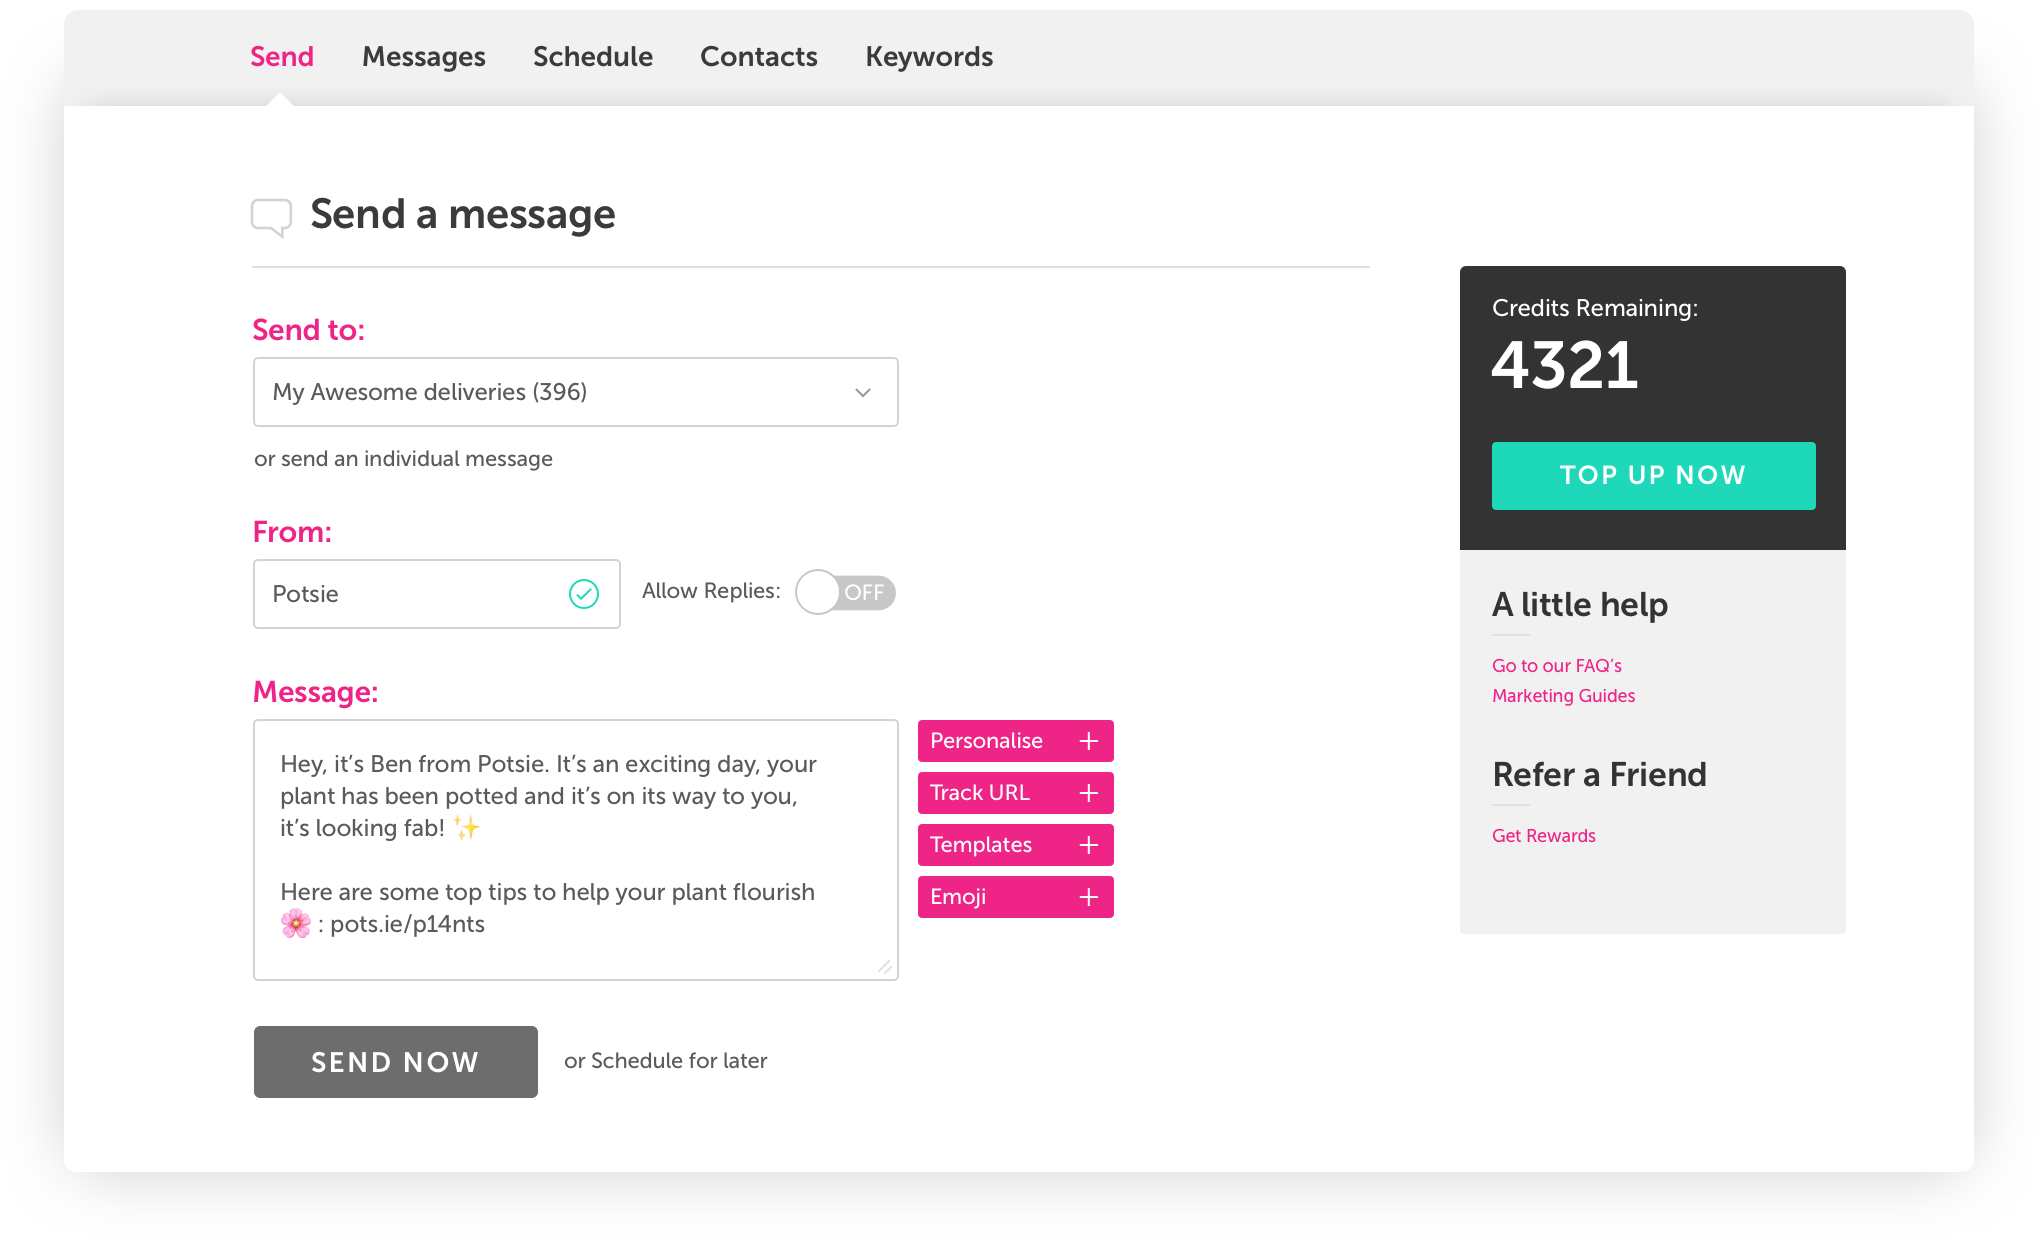 FireText's SMS platform makes complicated systems a thing of the past. You will be able to log in and start sending in seconds. There are lots of super handy features included too such as text message temples, SMS URL tracking, emojis and much more!